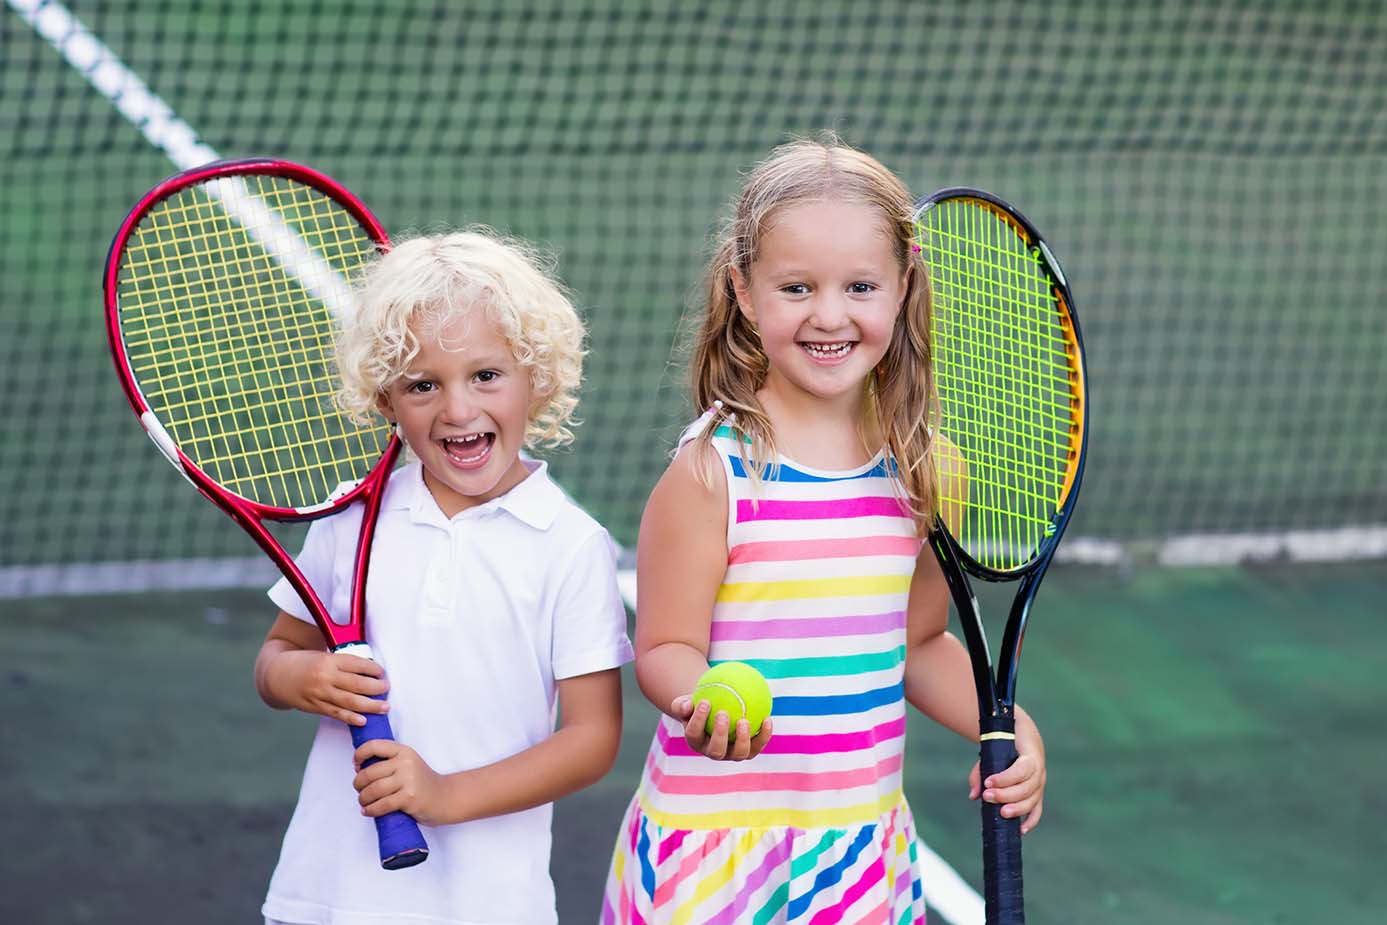 Boy and girl playing tennis on outdoor court. Kids with tennis racket and ball in sport club. Active exercise. Summer activities for children. Training for young kid. Child learning to play.